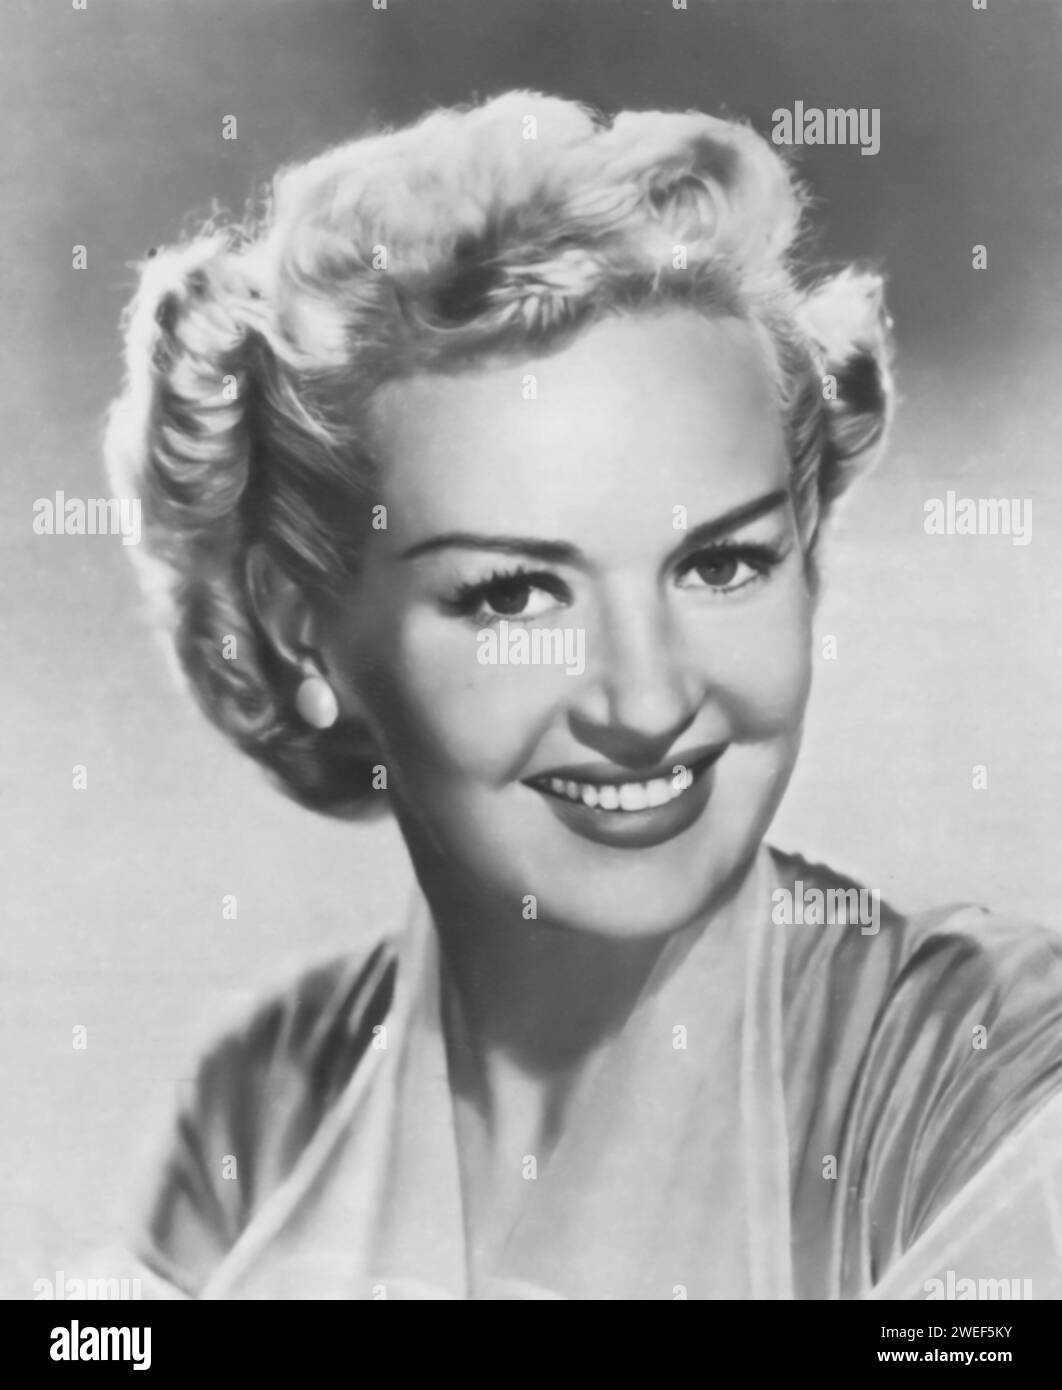 A portrait of actress Betty Grable, celebrated for her roles in films like 'Call Me Mister' (1951). In this musical comedy, Grable plays Kay Hudson, a USO performer and the former wife of a soldier, portrayed by Dan Dailey. The film is set in post-World War II Japan and features a mix of song, dance, and lighthearted romance. Stock Photo